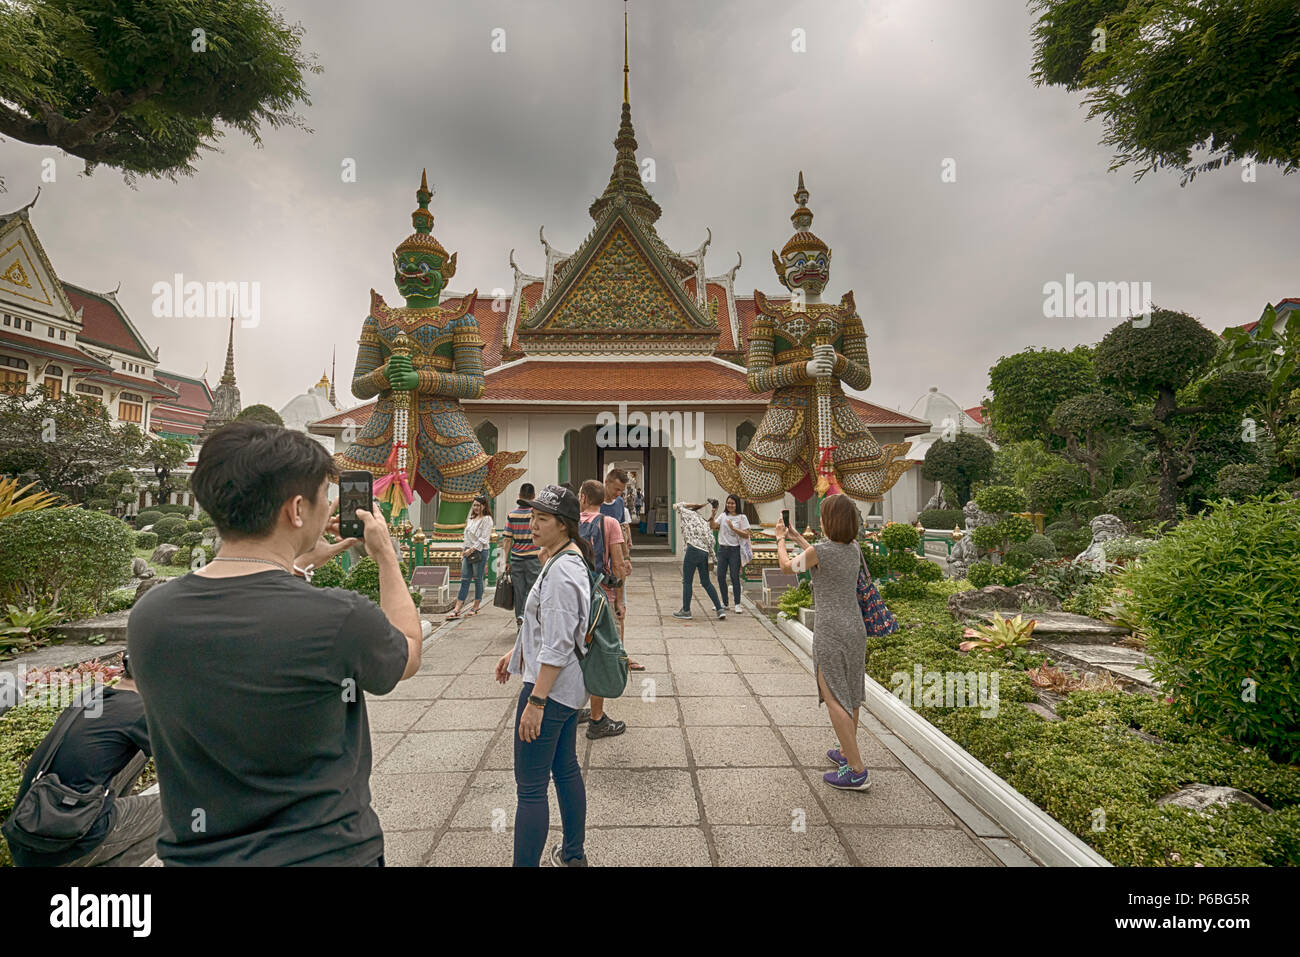 Tourists in the gardens of Wat Arun temple in Bnagkok, Thailand Stock Photo